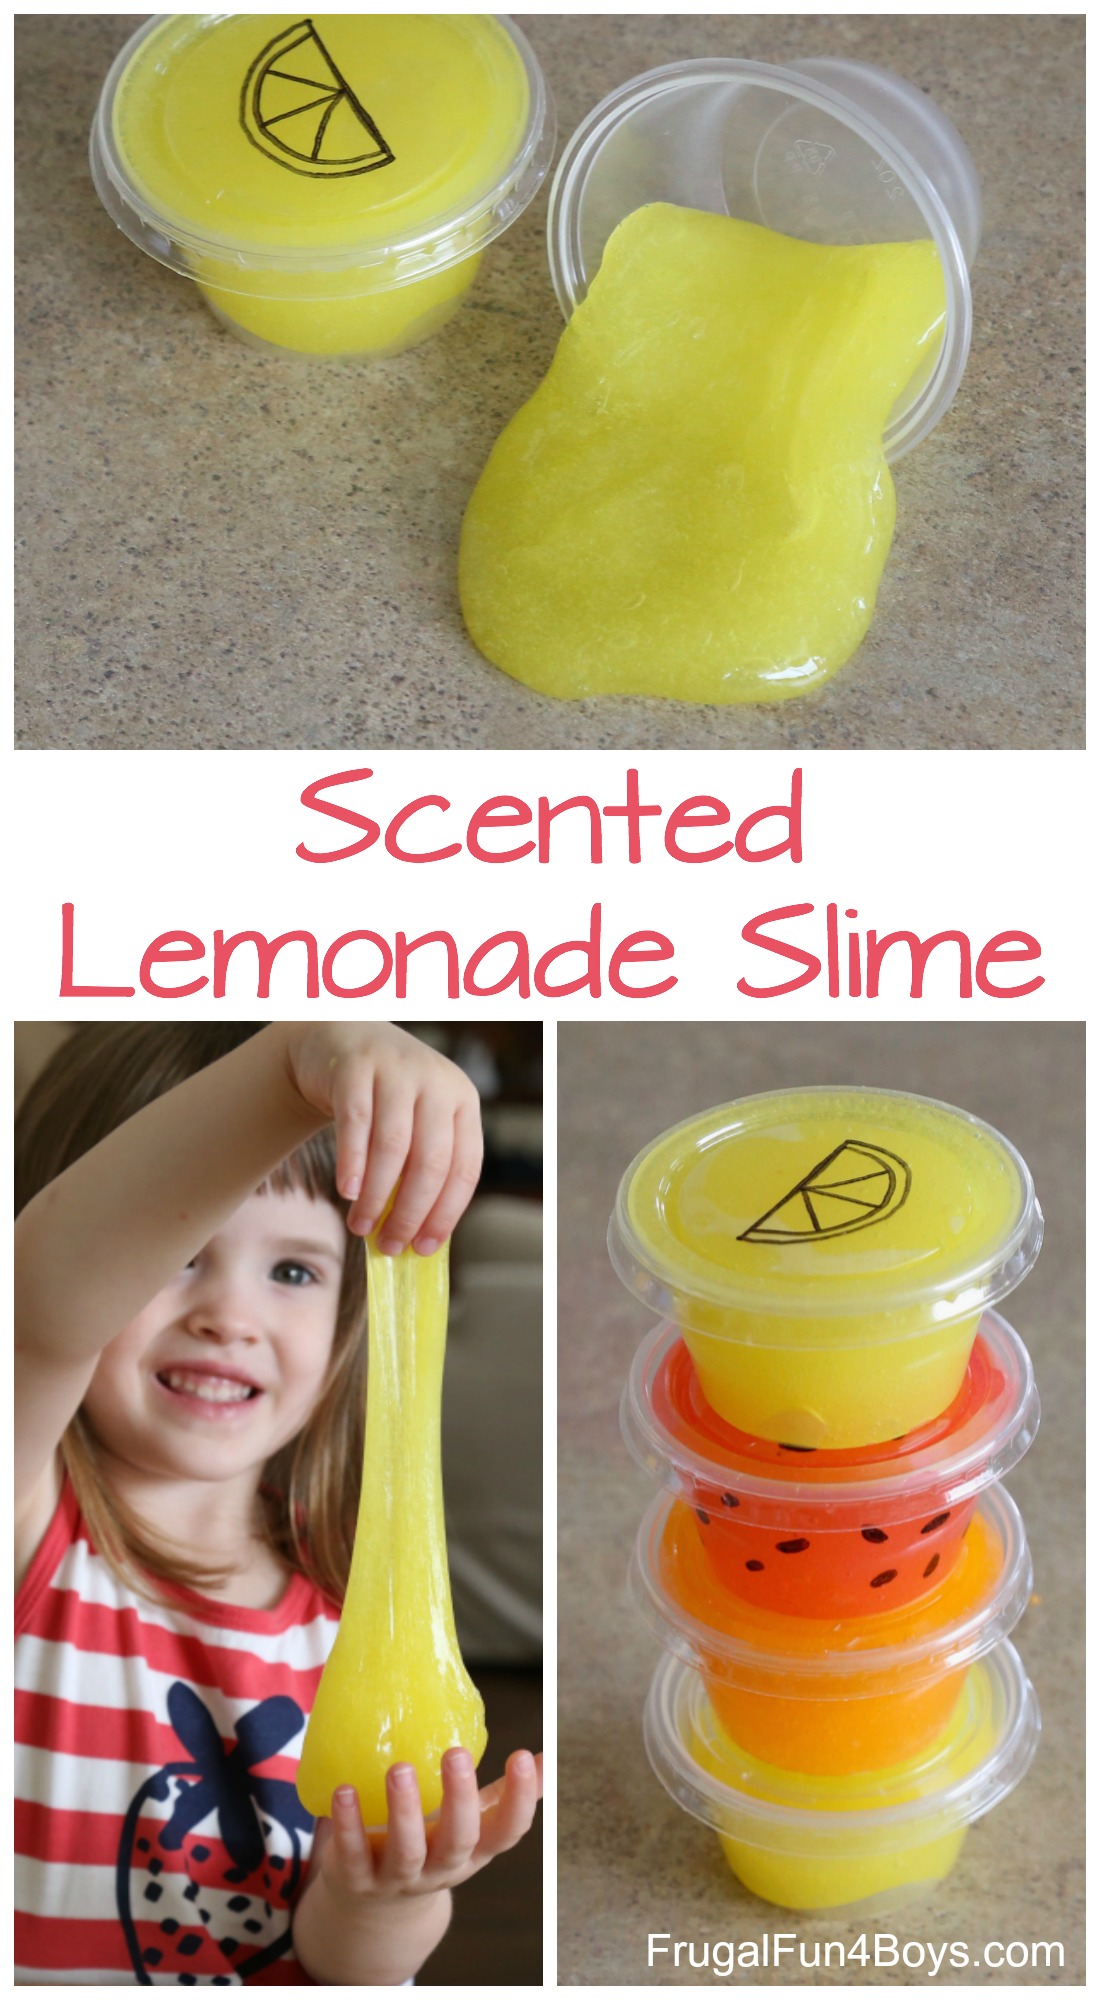 How to Make Scented Lemonade Slime - Frugal Fun For Boys and Girls